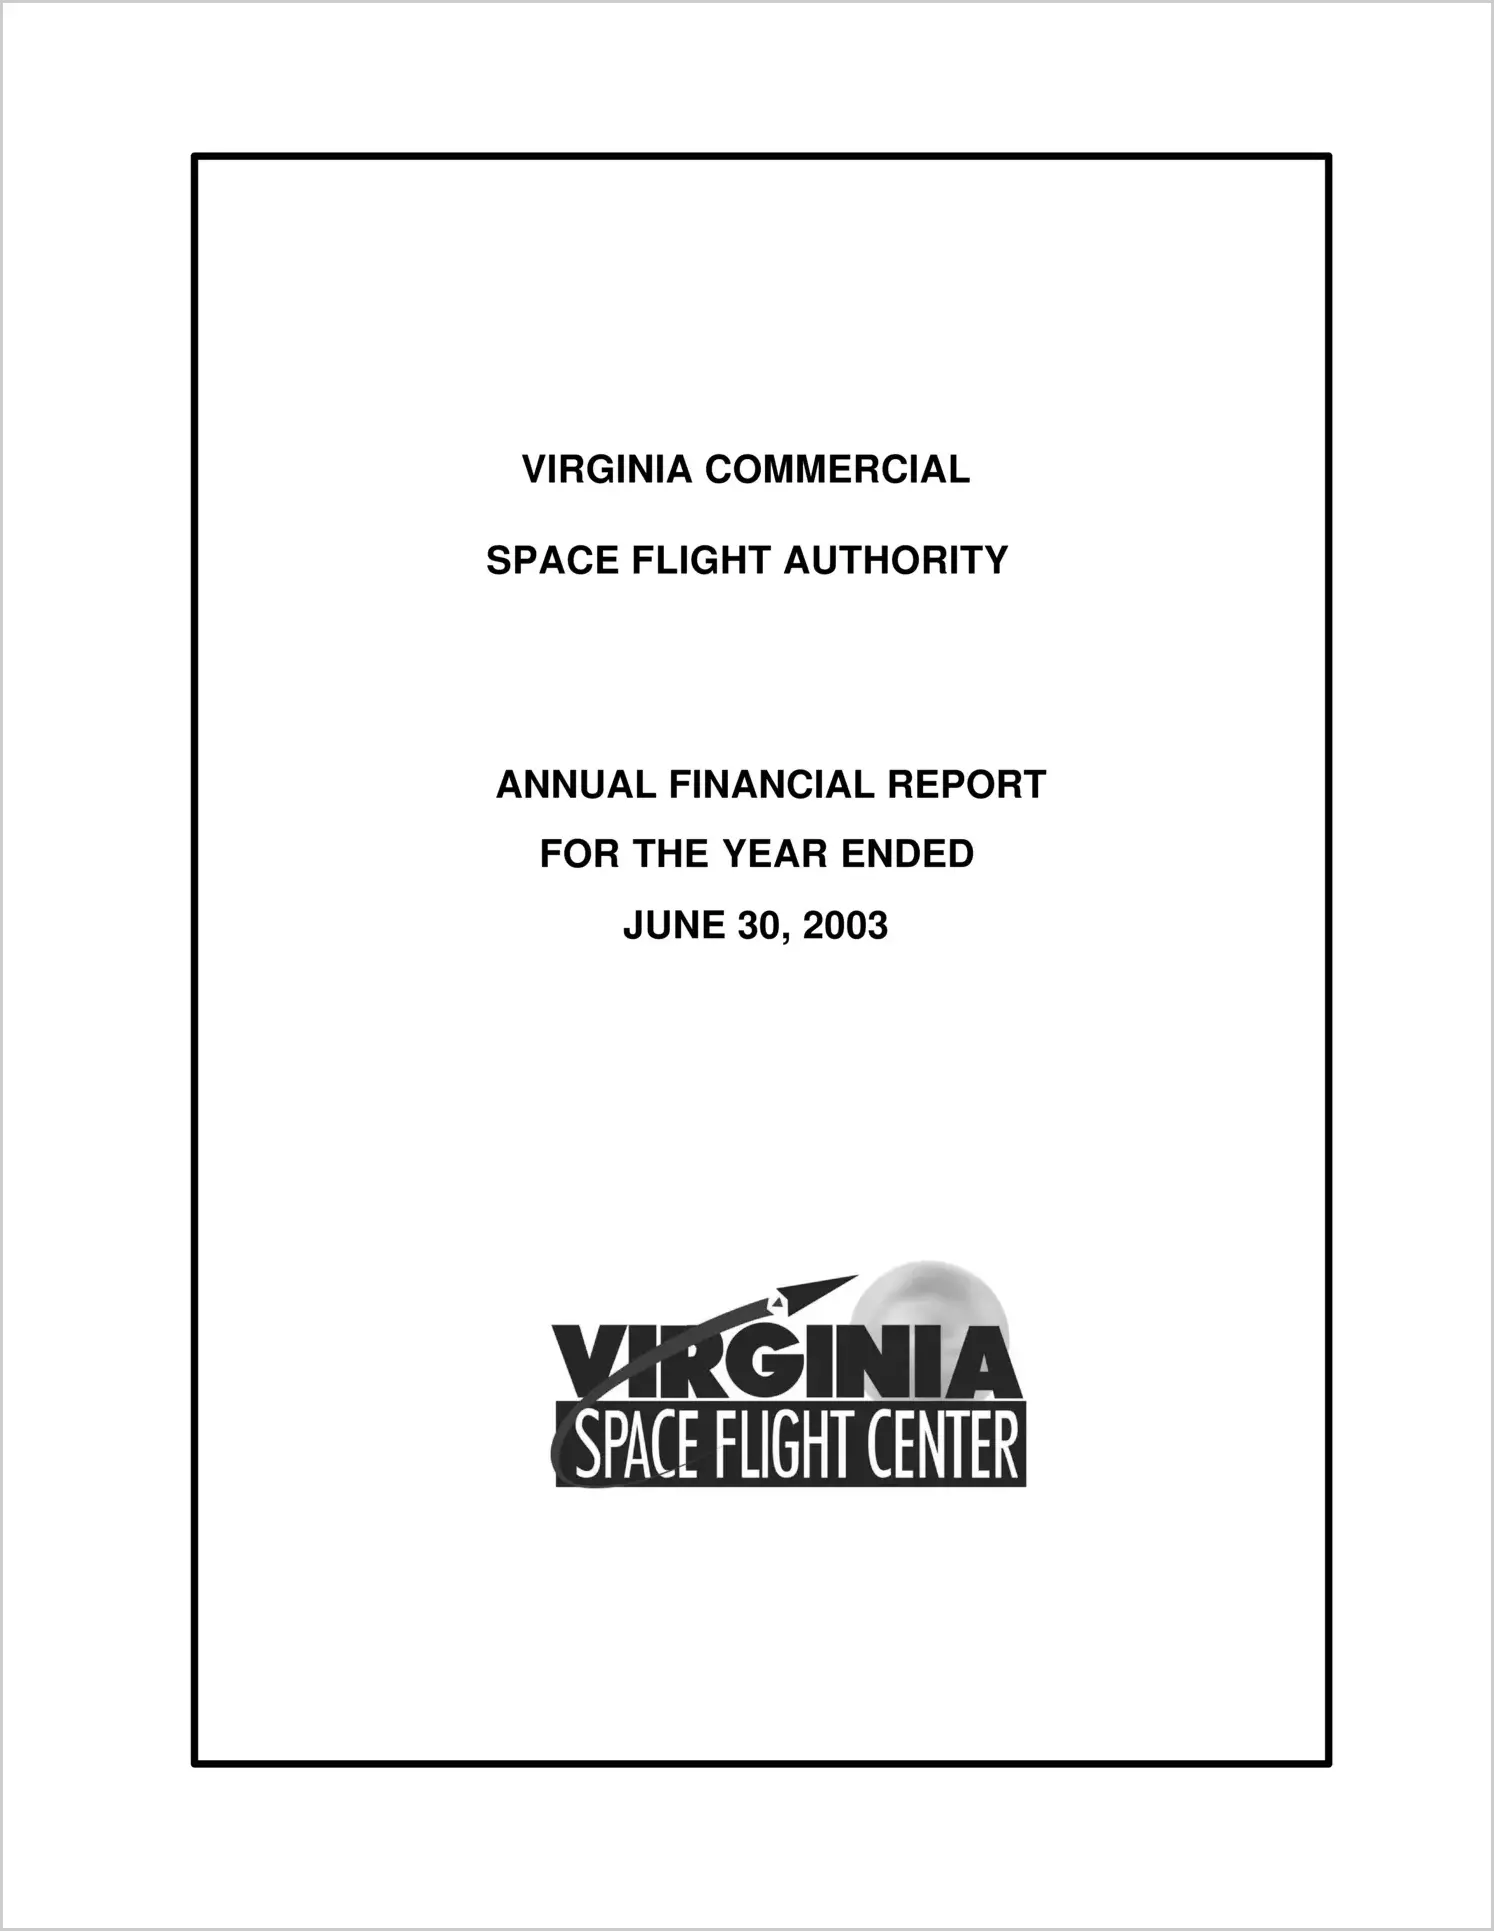 Virginia Commercial Space Flight Authority for the year ended June 30, 2003